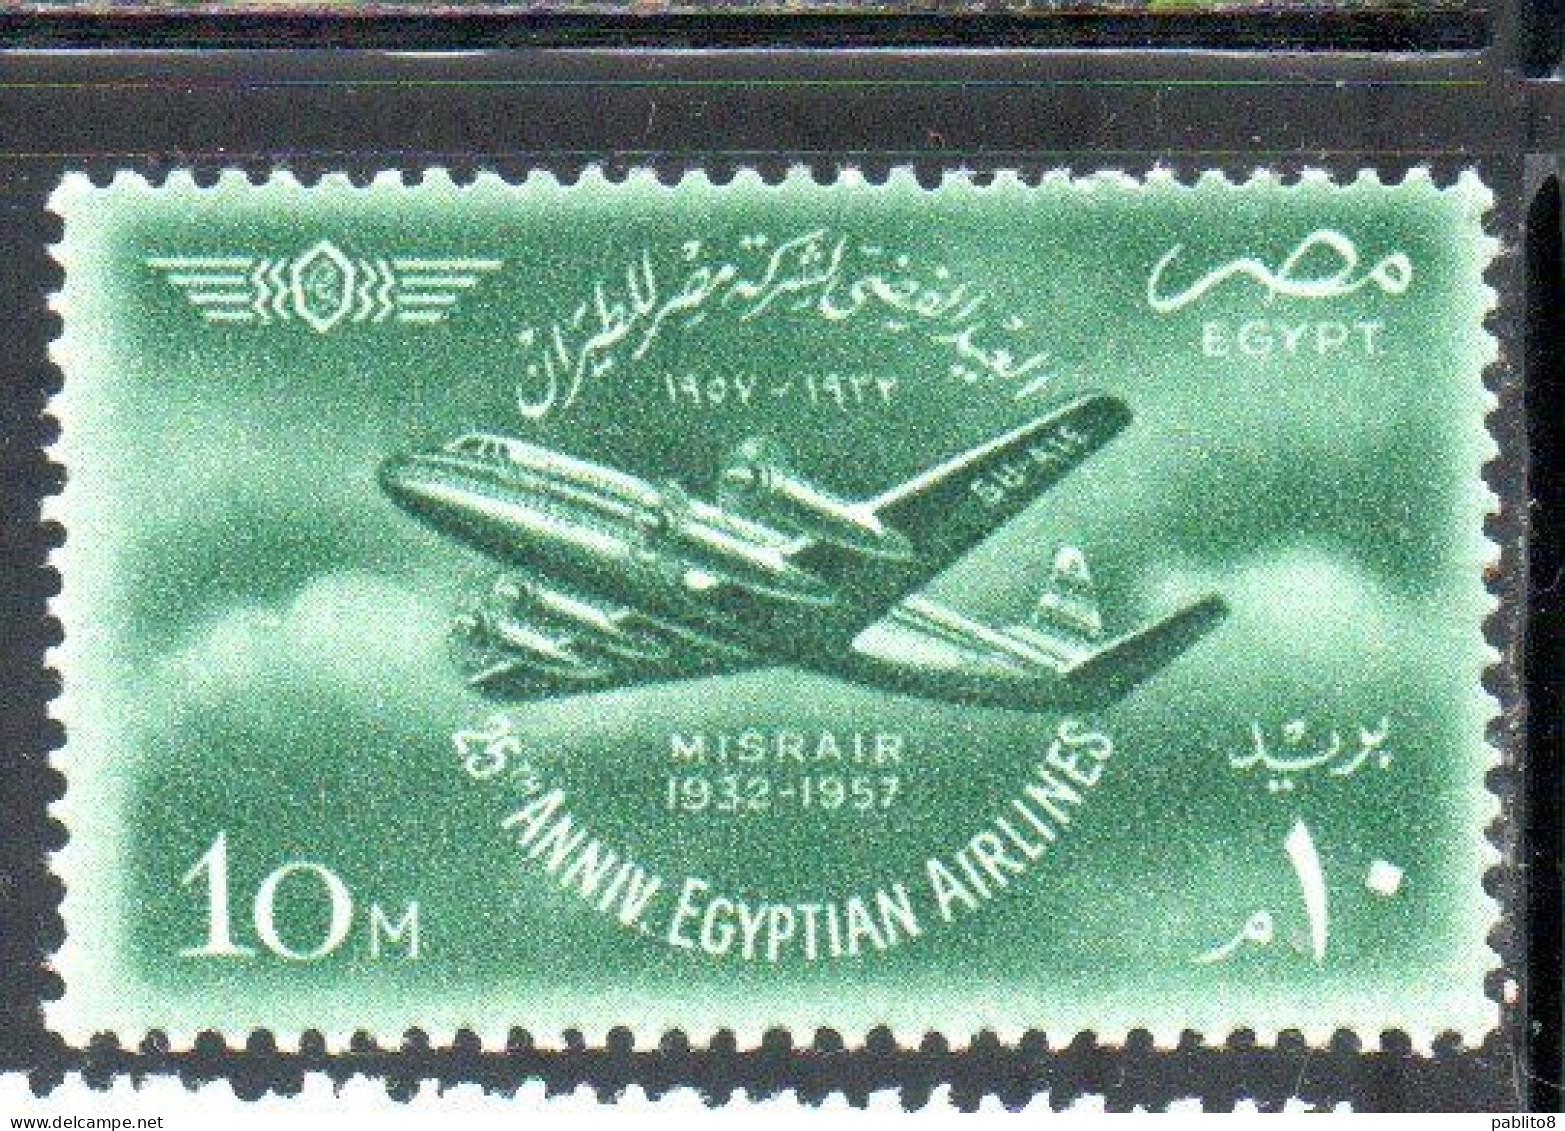 UAR EGYPT EGITTO 1957 EGYPTIAN AIR FORCE AND OF MISRAIR AIRLINE VISCOUNT PLANE 10m MNH - Neufs